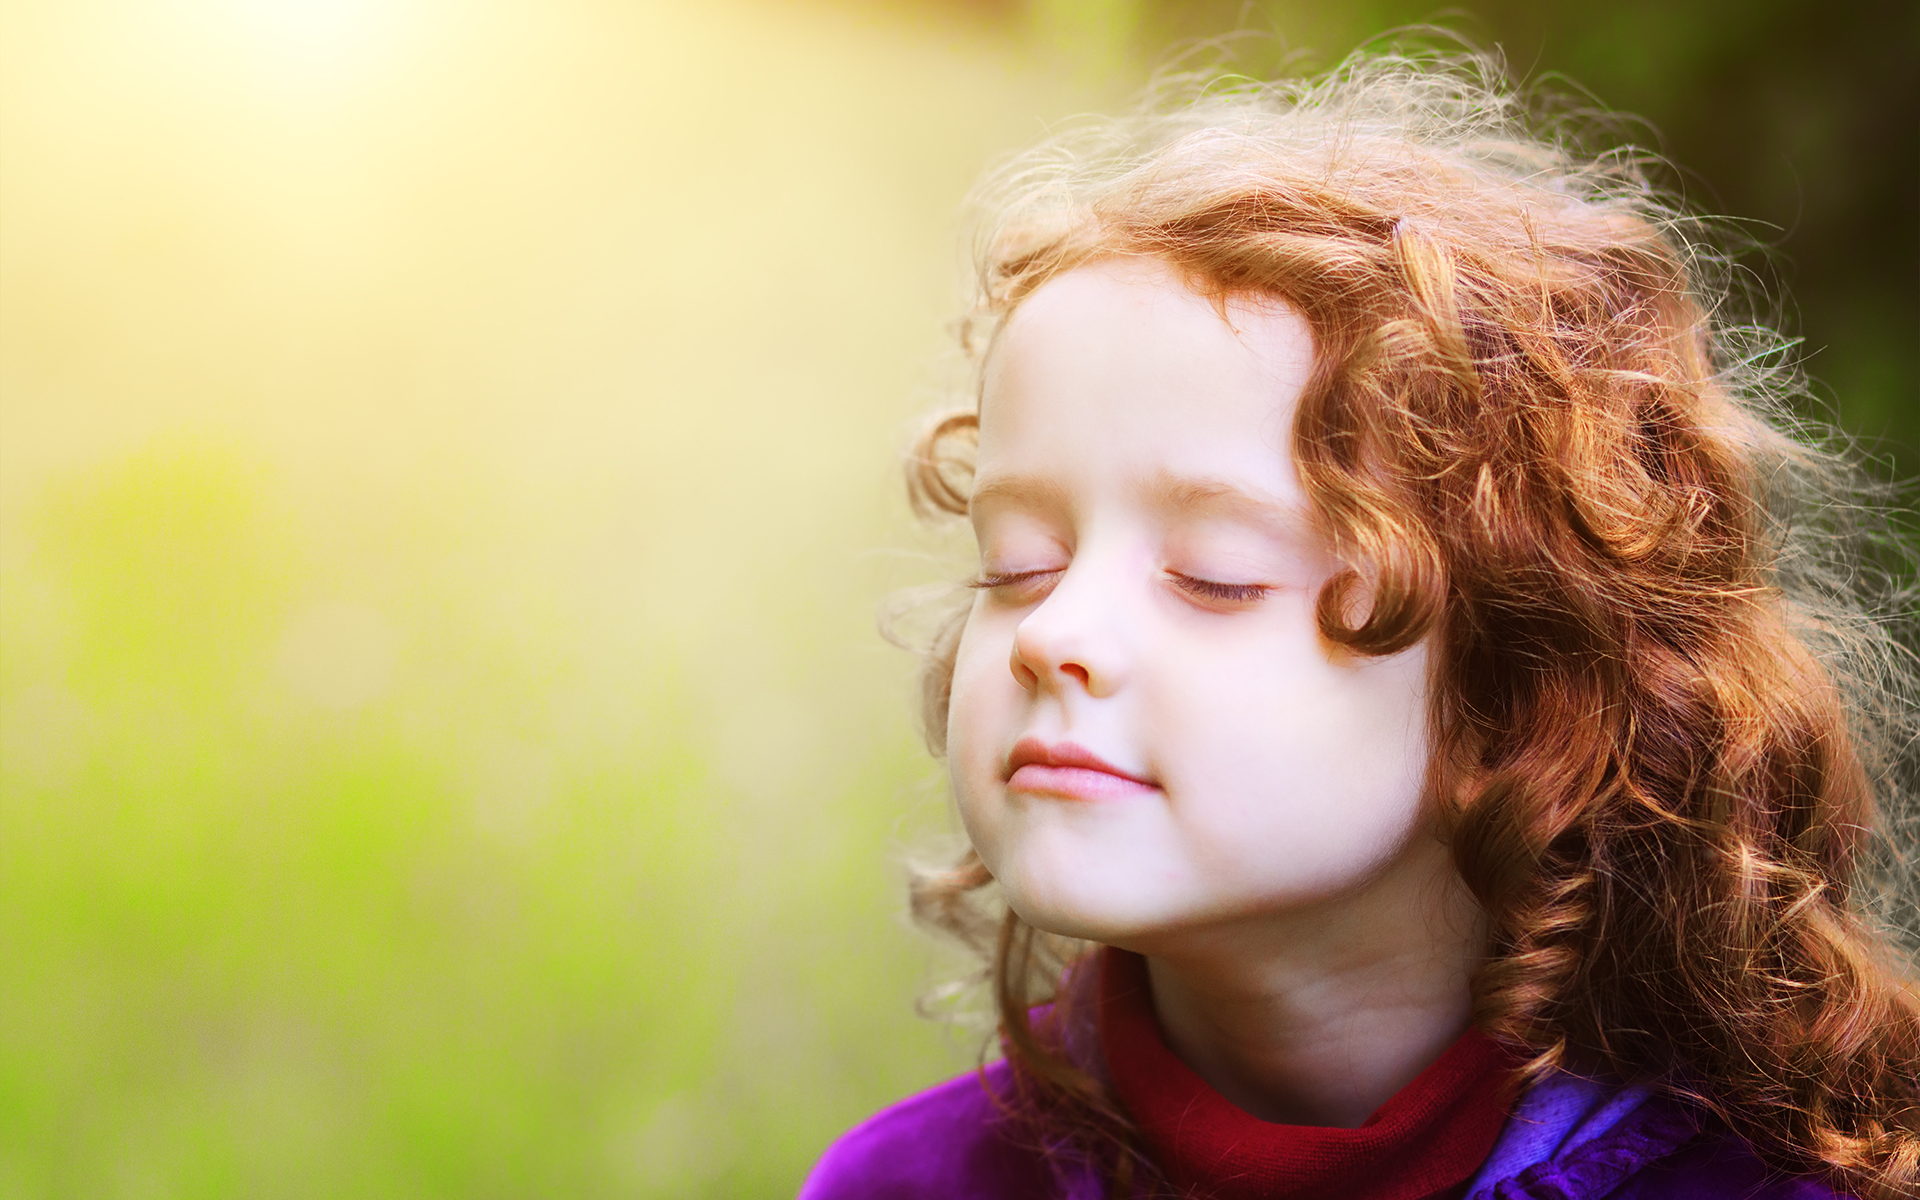 Photo of a little girl with red hair standing outside with her eyes closed, taking a deep breath.